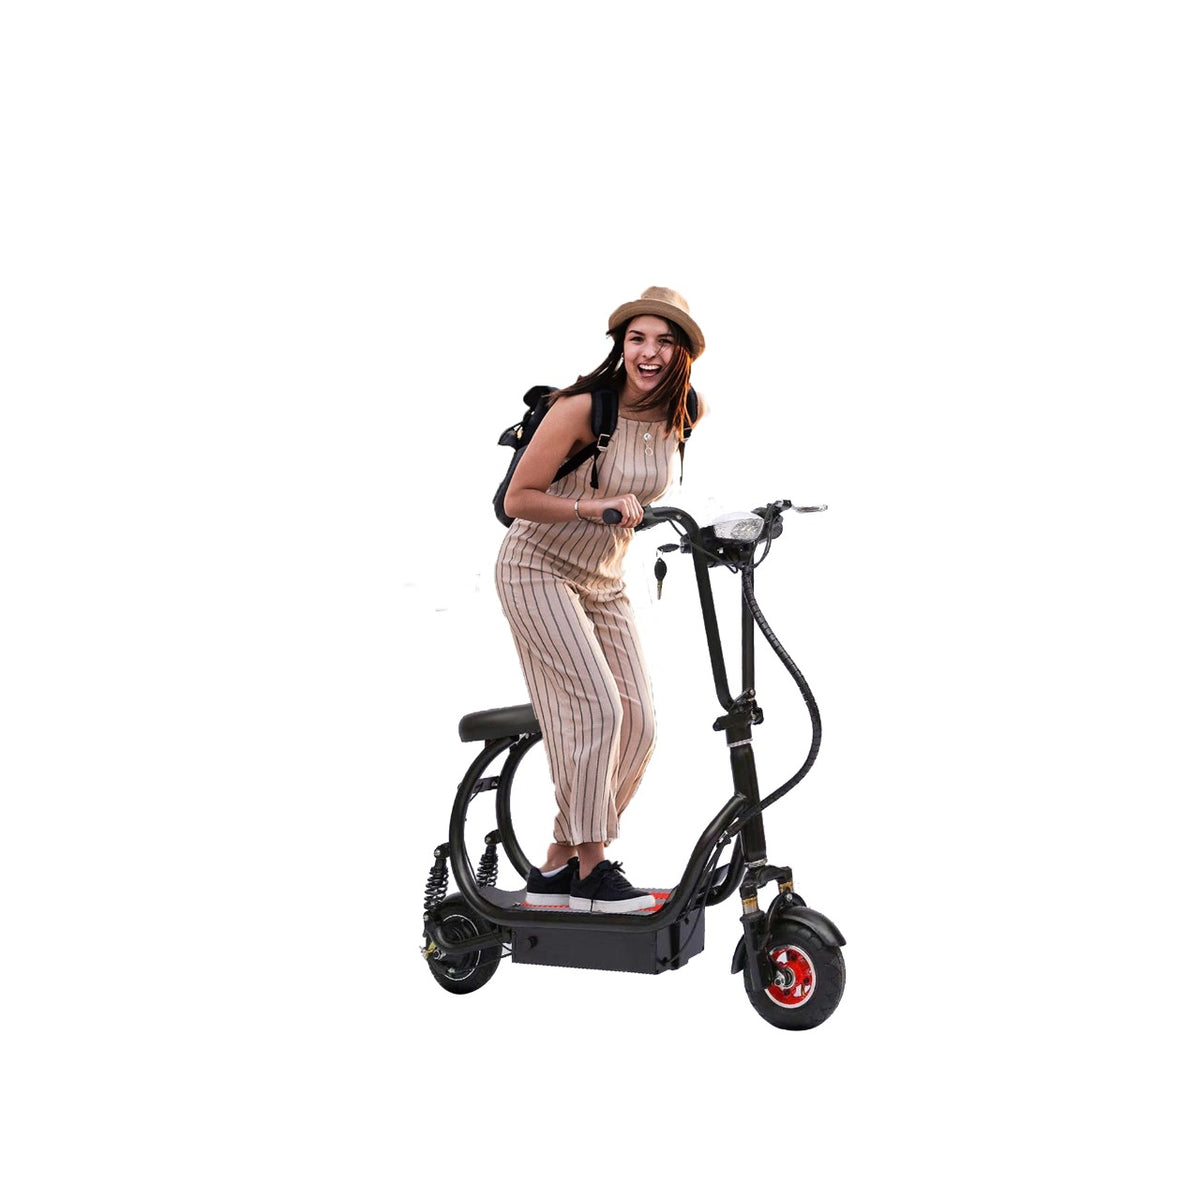 MEGAWHEELS Foldable Electric Scooter with Seat